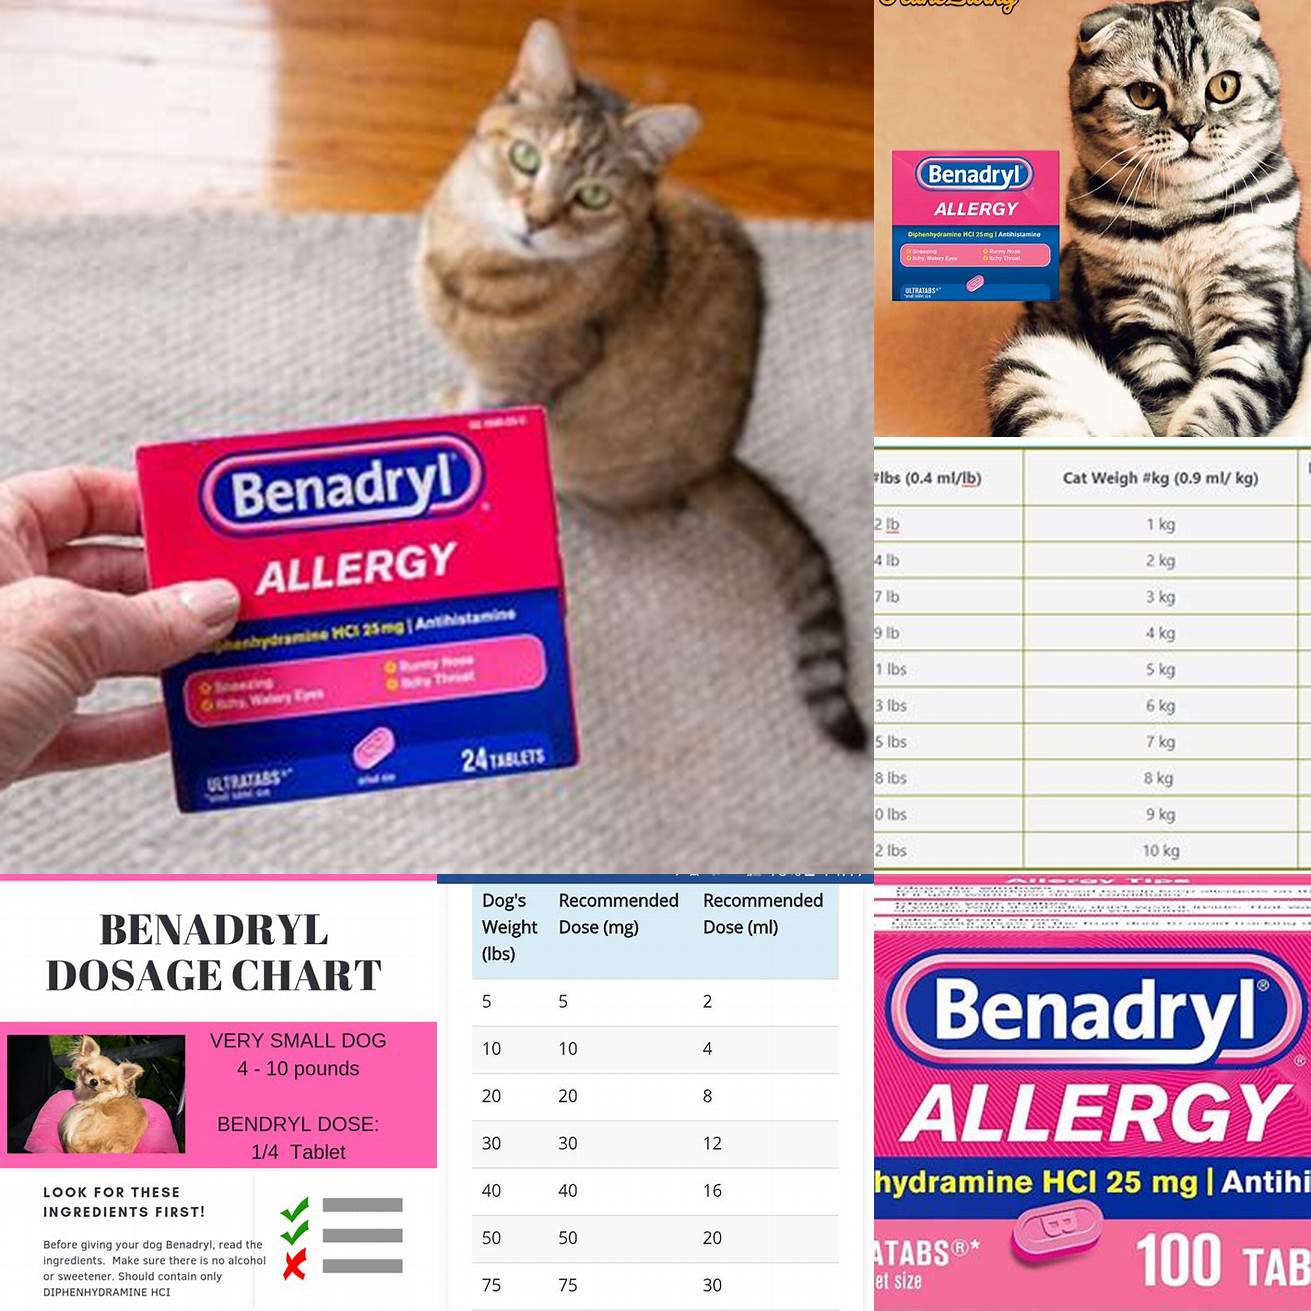 Q How much Benadryl can I give my cat